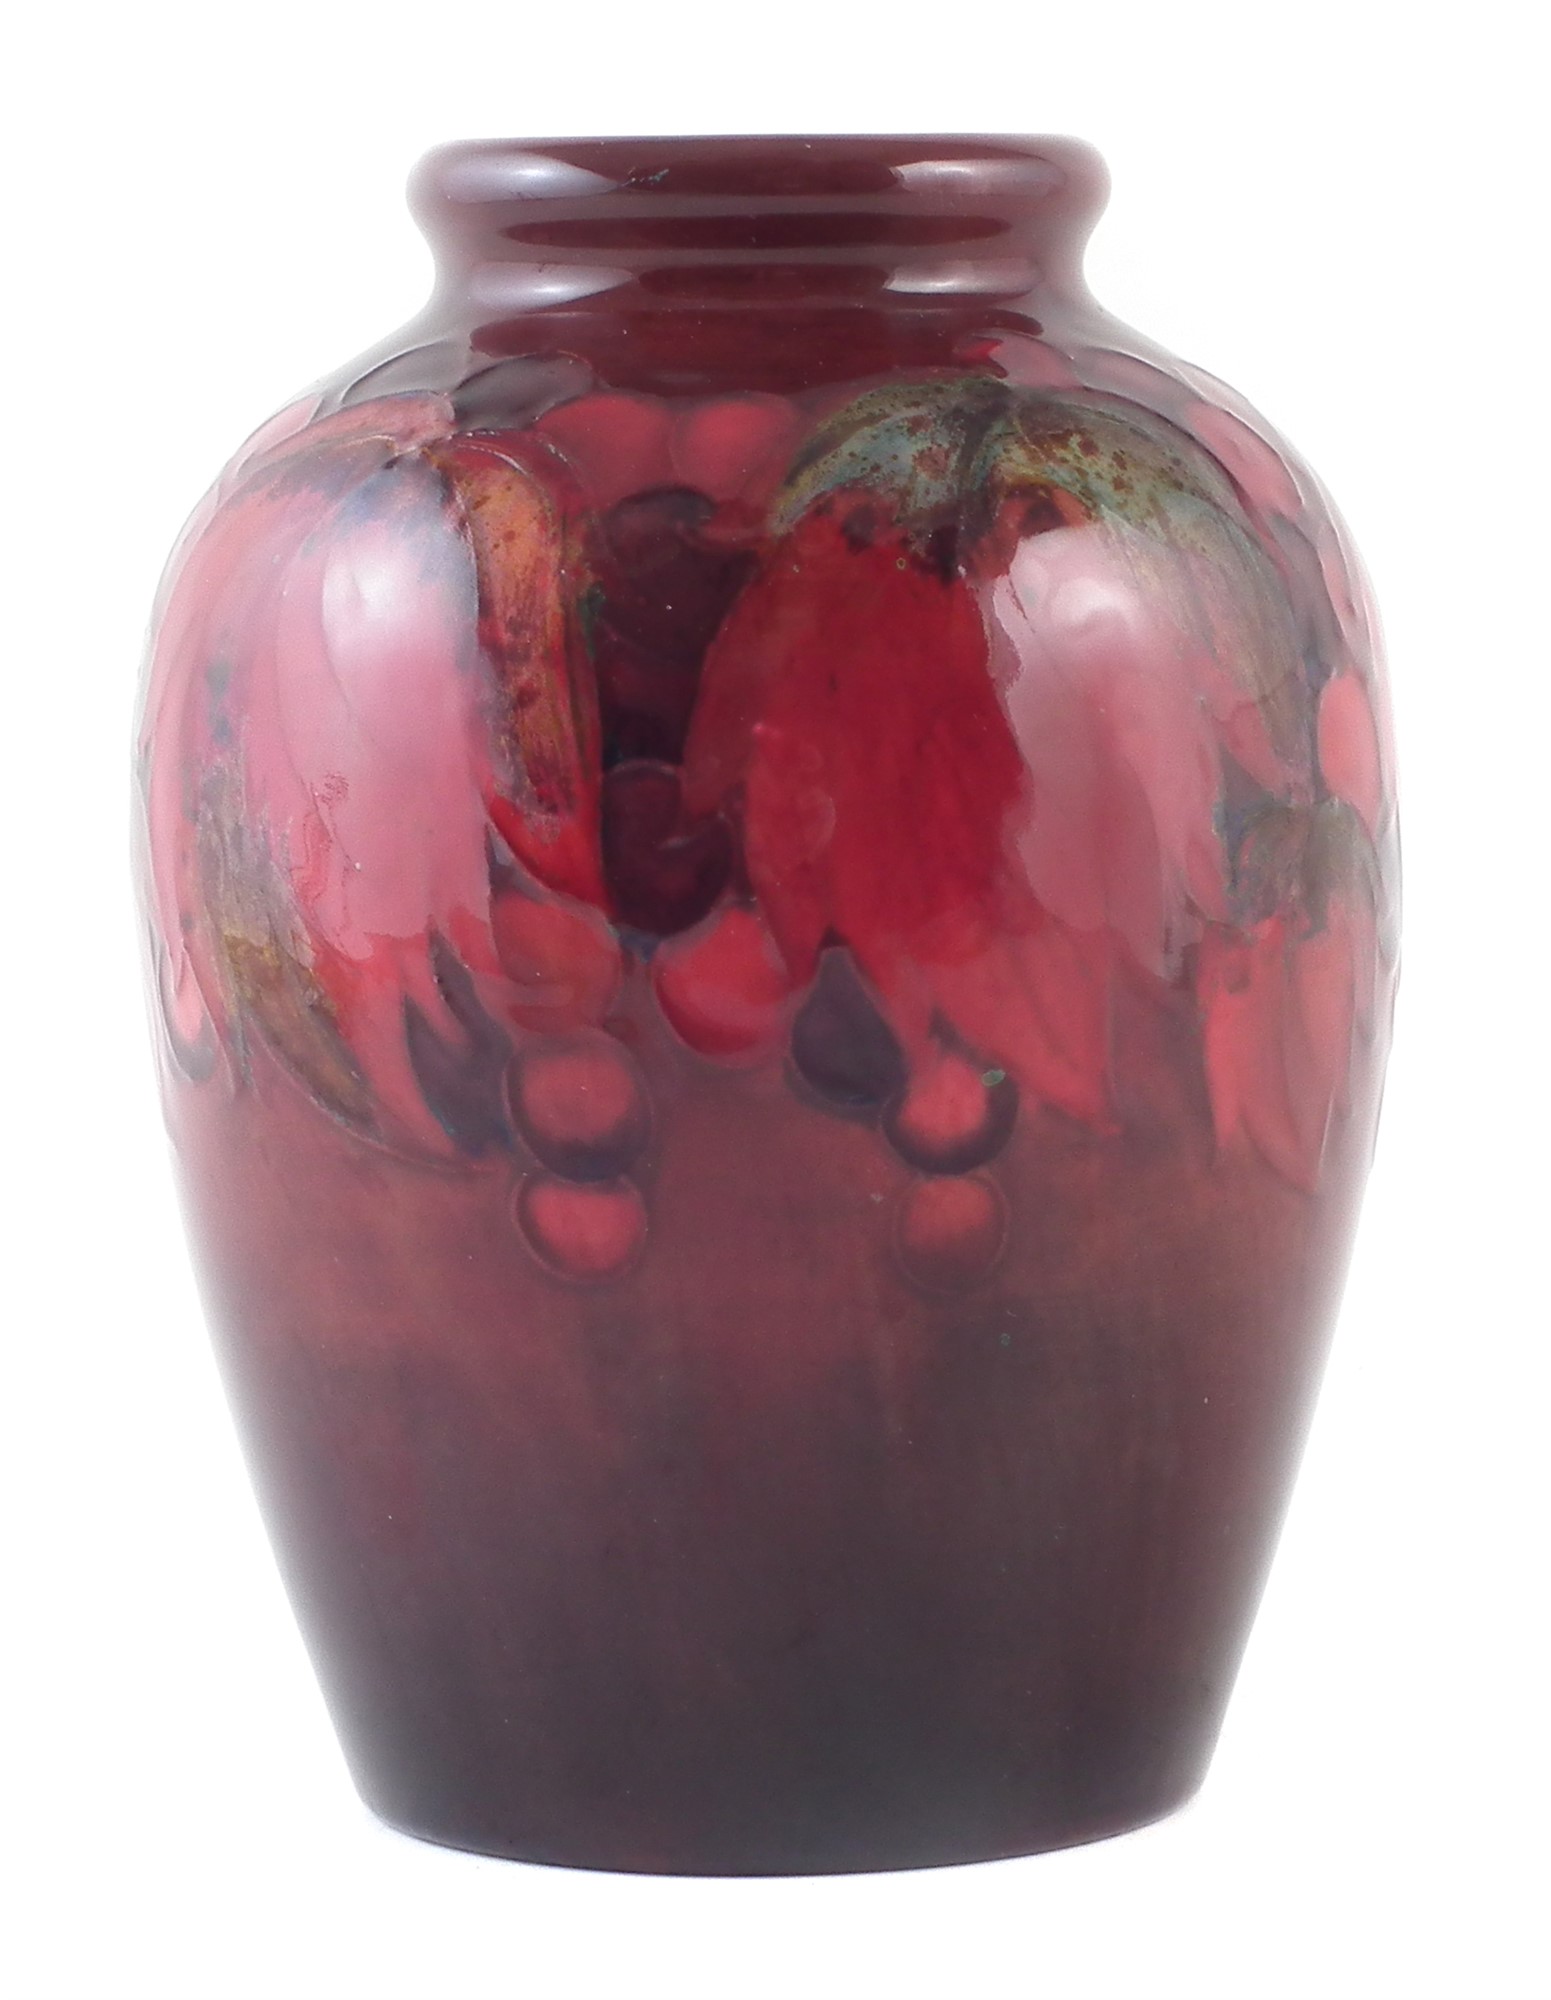 Moorcroft flambe vase , decorated with leaves and berries pattern, impressed William Moorcroft and